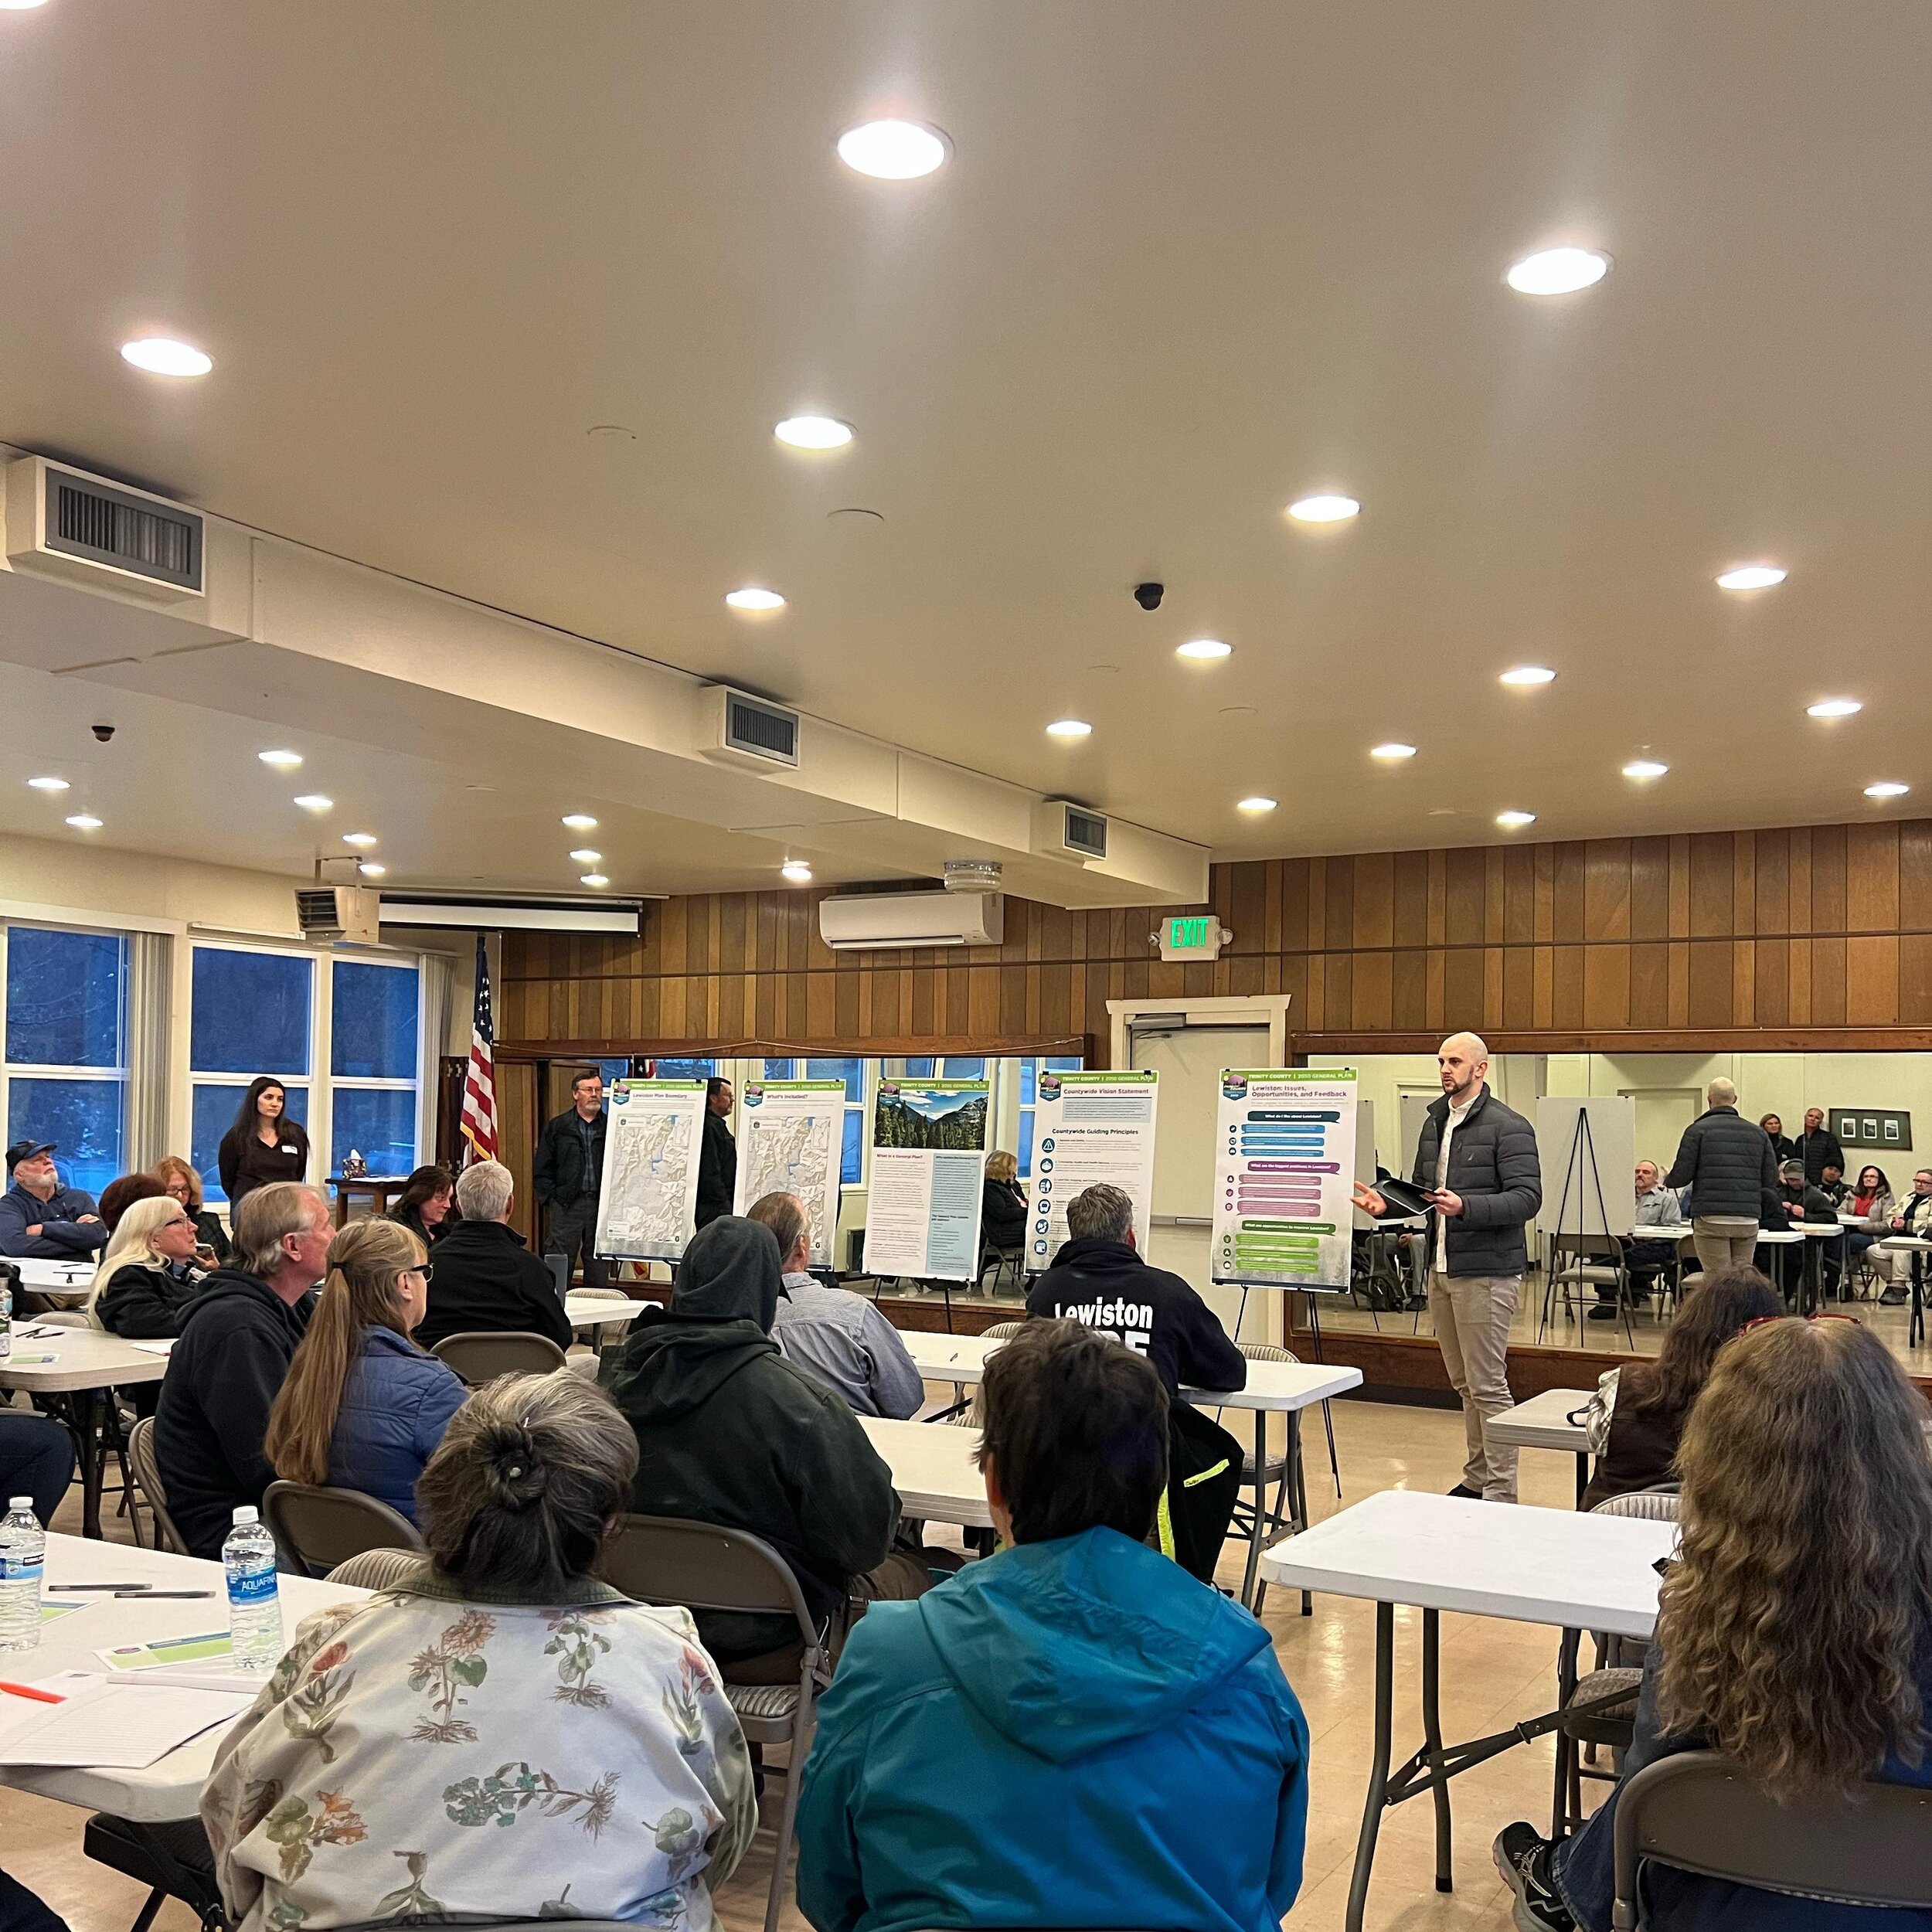 If you missed yesterdays &ldquo;Lewiston&rsquo;s General Plan&rdquo; meeting&mdash; I highly suggest you visit the website below and make your voices known for what you&rsquo;d like to be included in the general plan! There is a spot for public comme